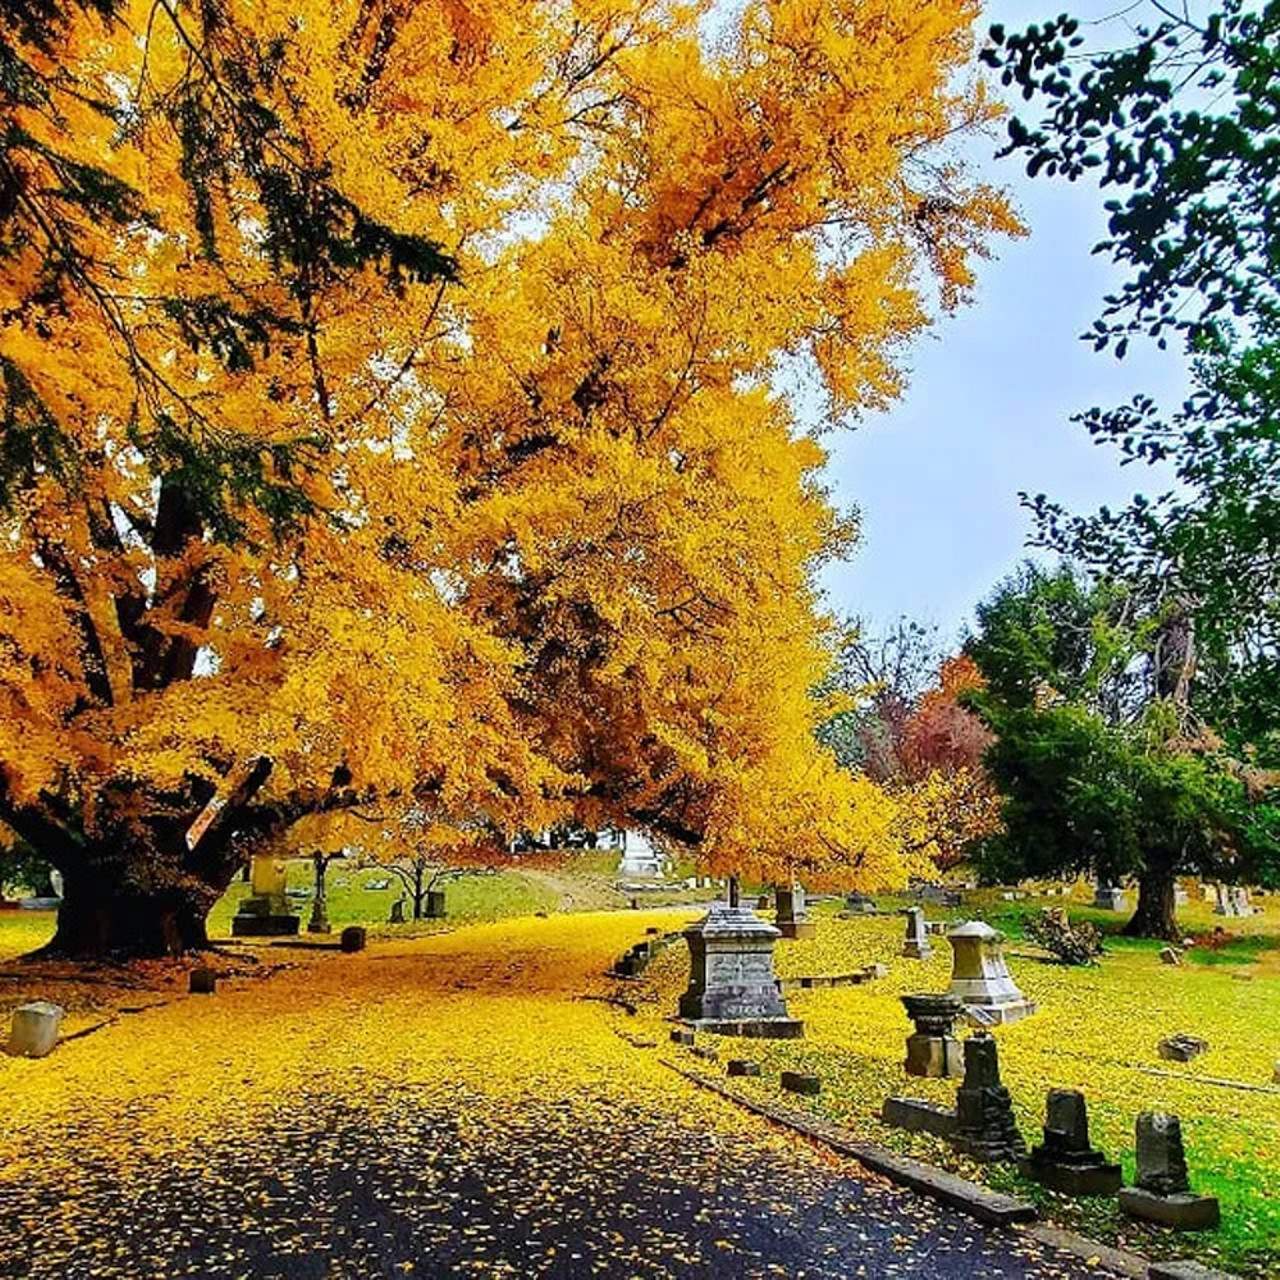 Cave Hill Cemetery
701 Baxter Ave.
Perhaps this suggestion is a little morbid, but hey, the grounds are very beautiful.
Photo via cavehillcemetery_arboretum/Instagram